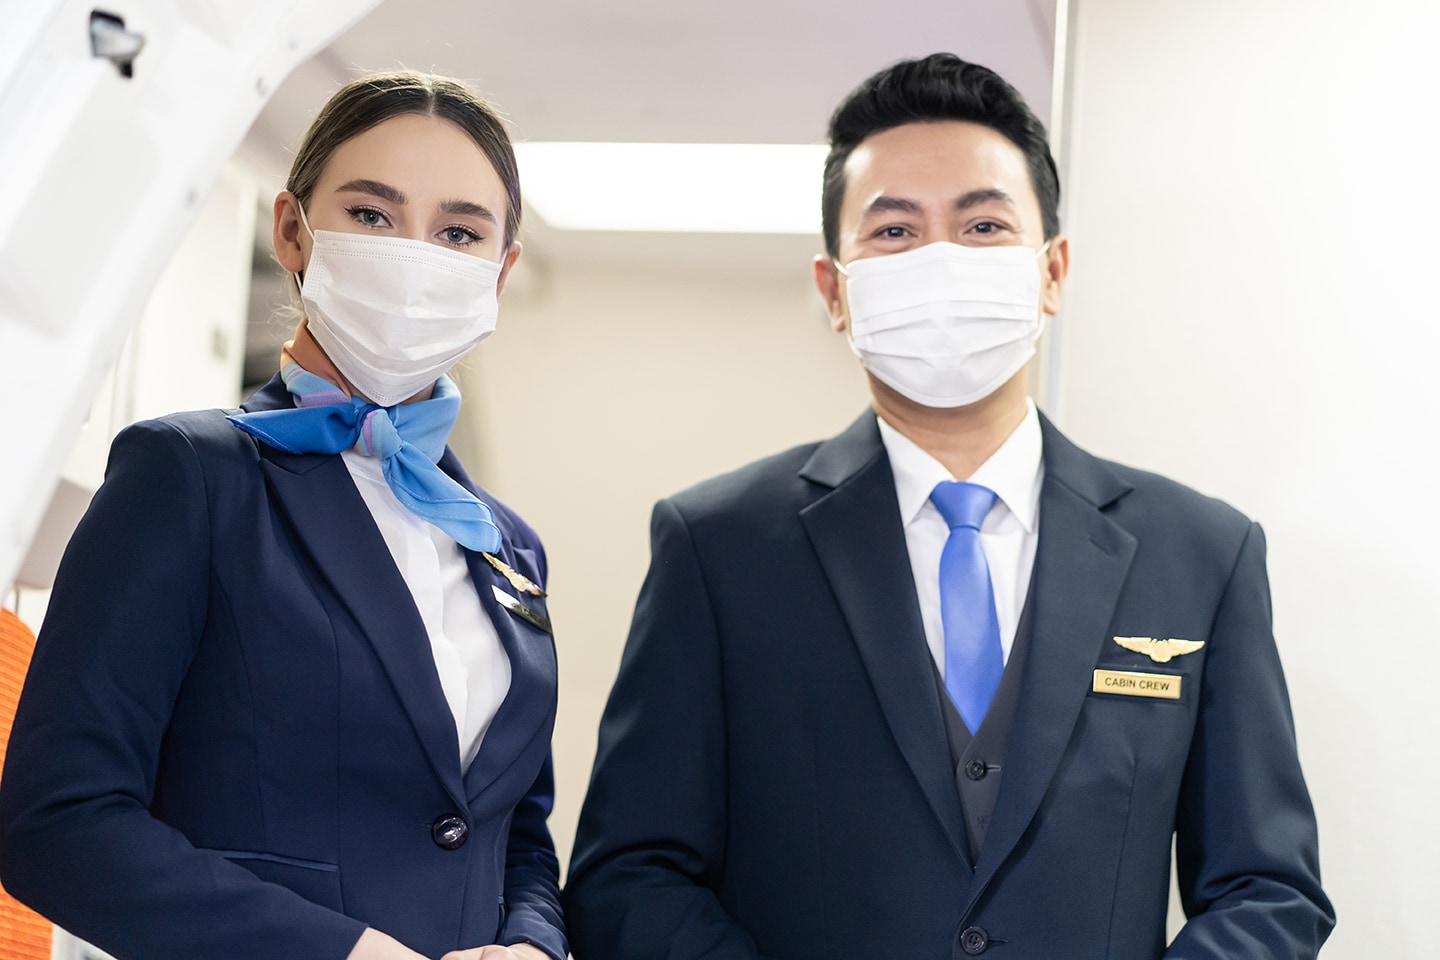 Asian flight attendants wearing face mask waiting for greeting passengers coming on board in airplane during the Covid pandemic to prevent coronavirus infection. Healthcare in transportation concept.